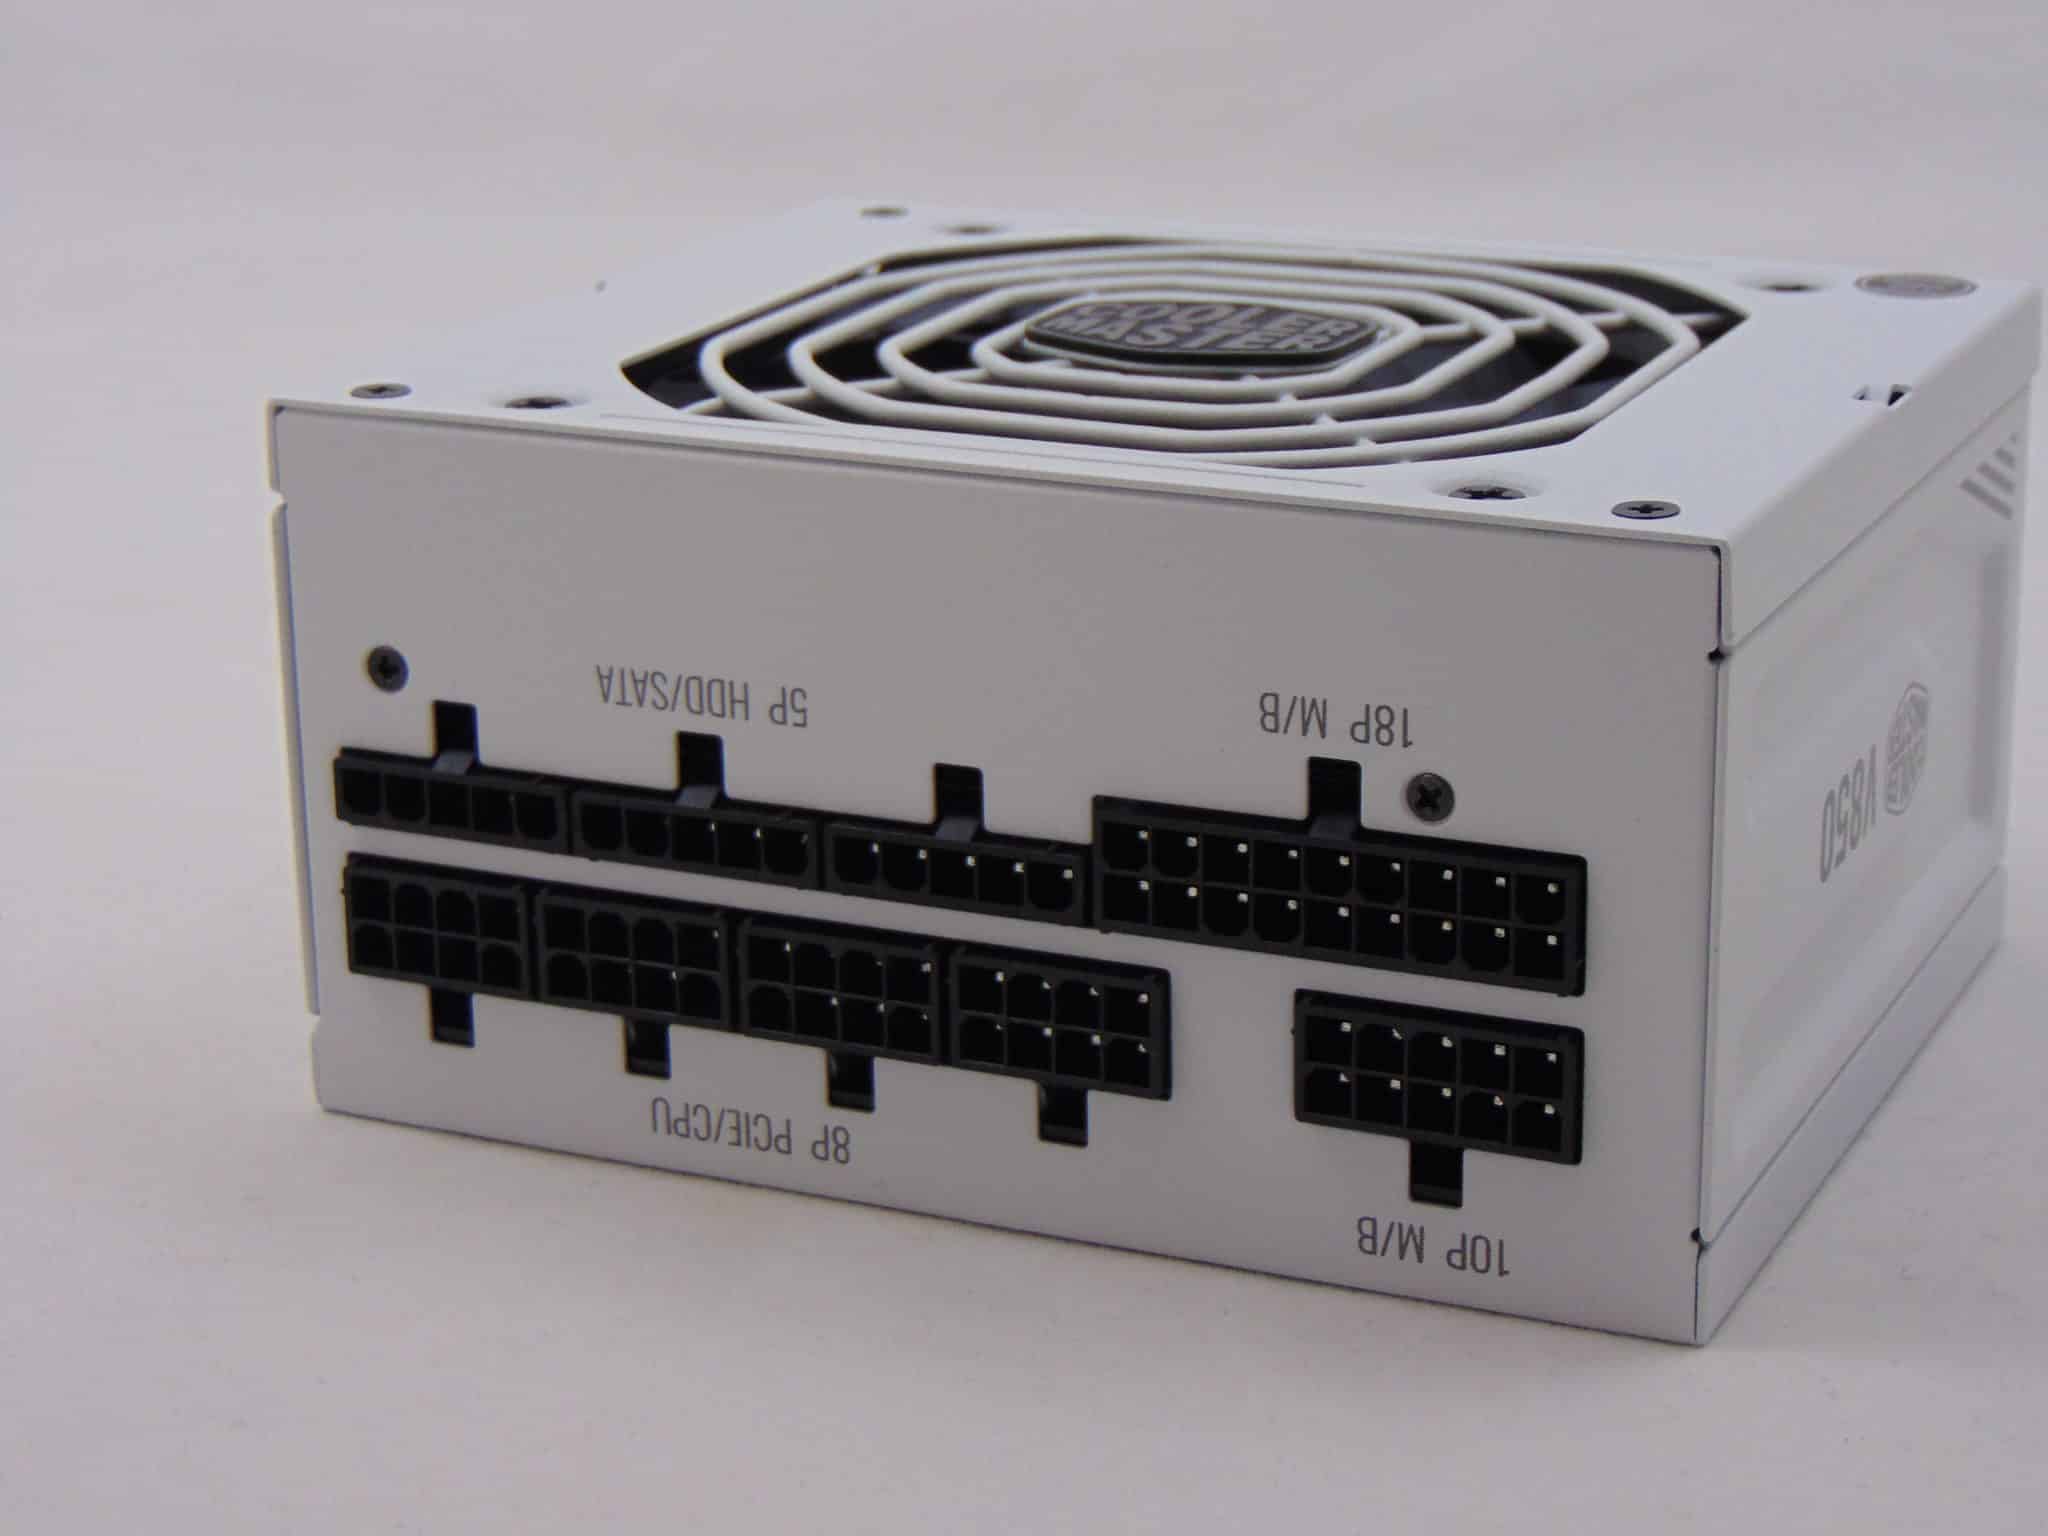 Cooler Master V850 SFX Gold WHITE Edition 850W Power Supply Review 